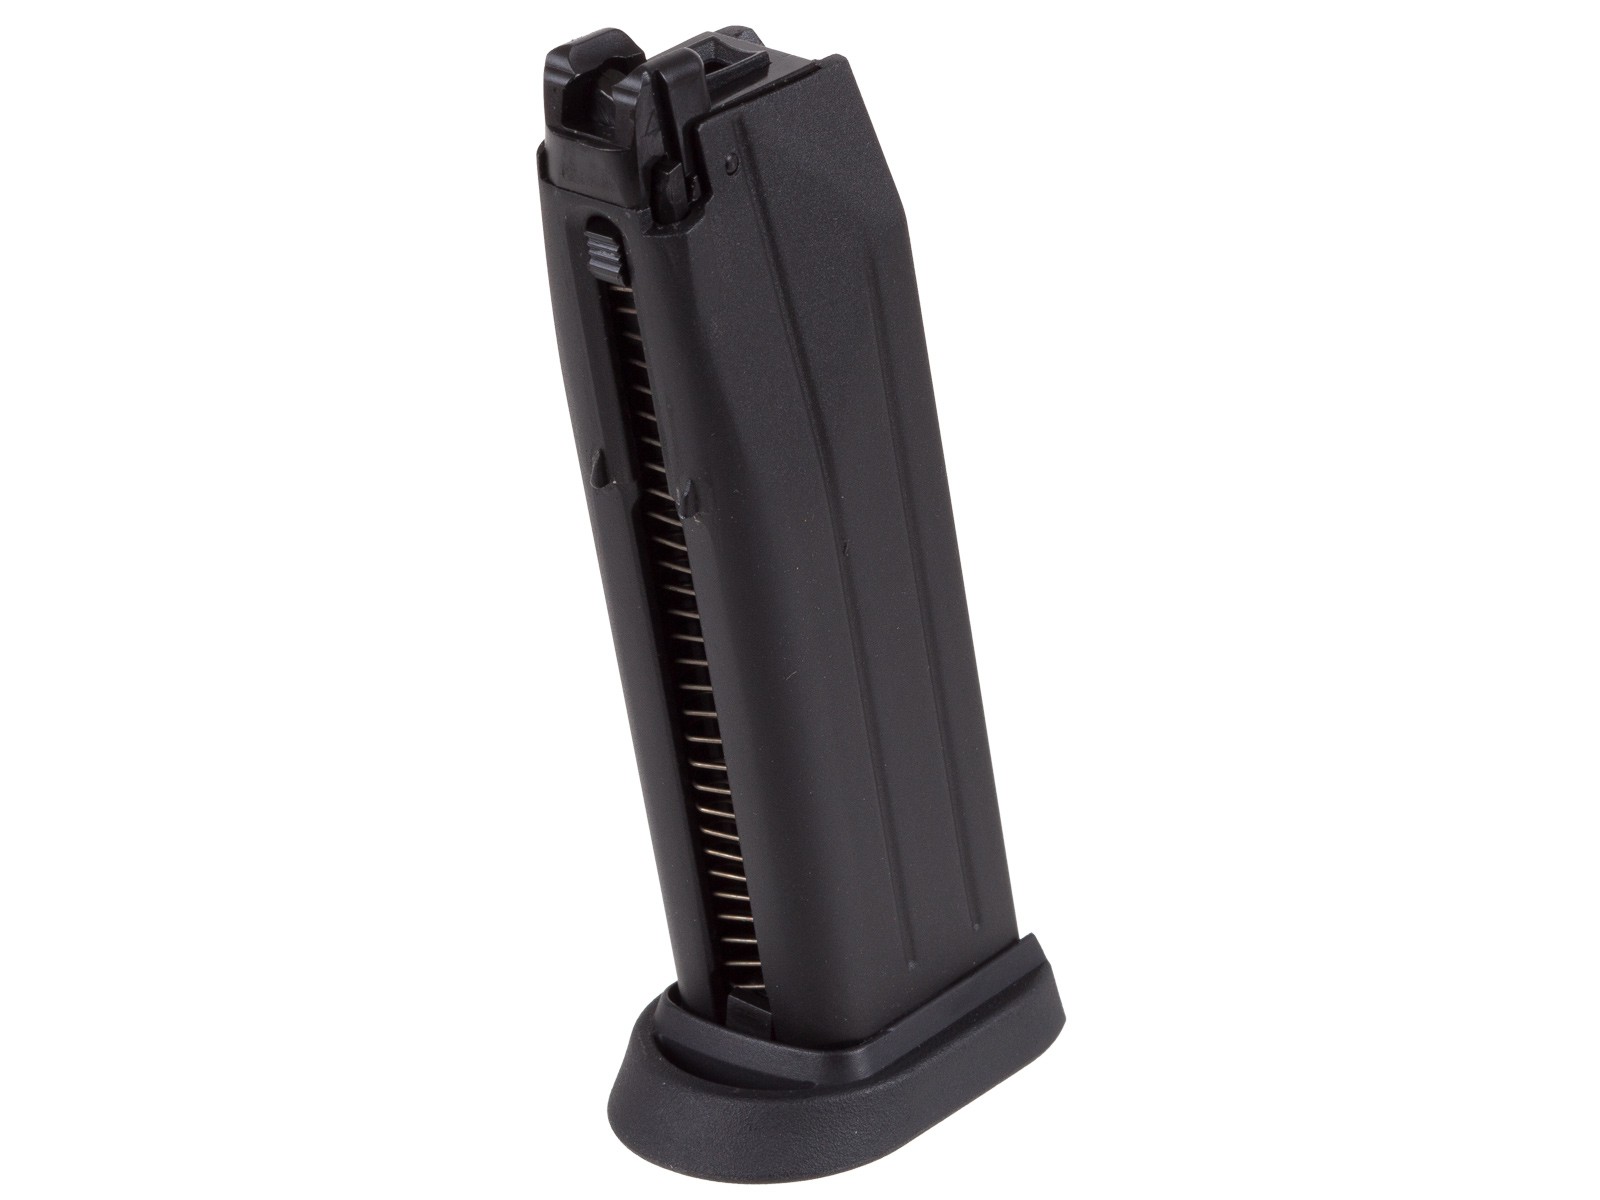 FN Herstal FNS-95 Airsoft Green Gas Magazine, 22 Rounds, Fits FNS-9